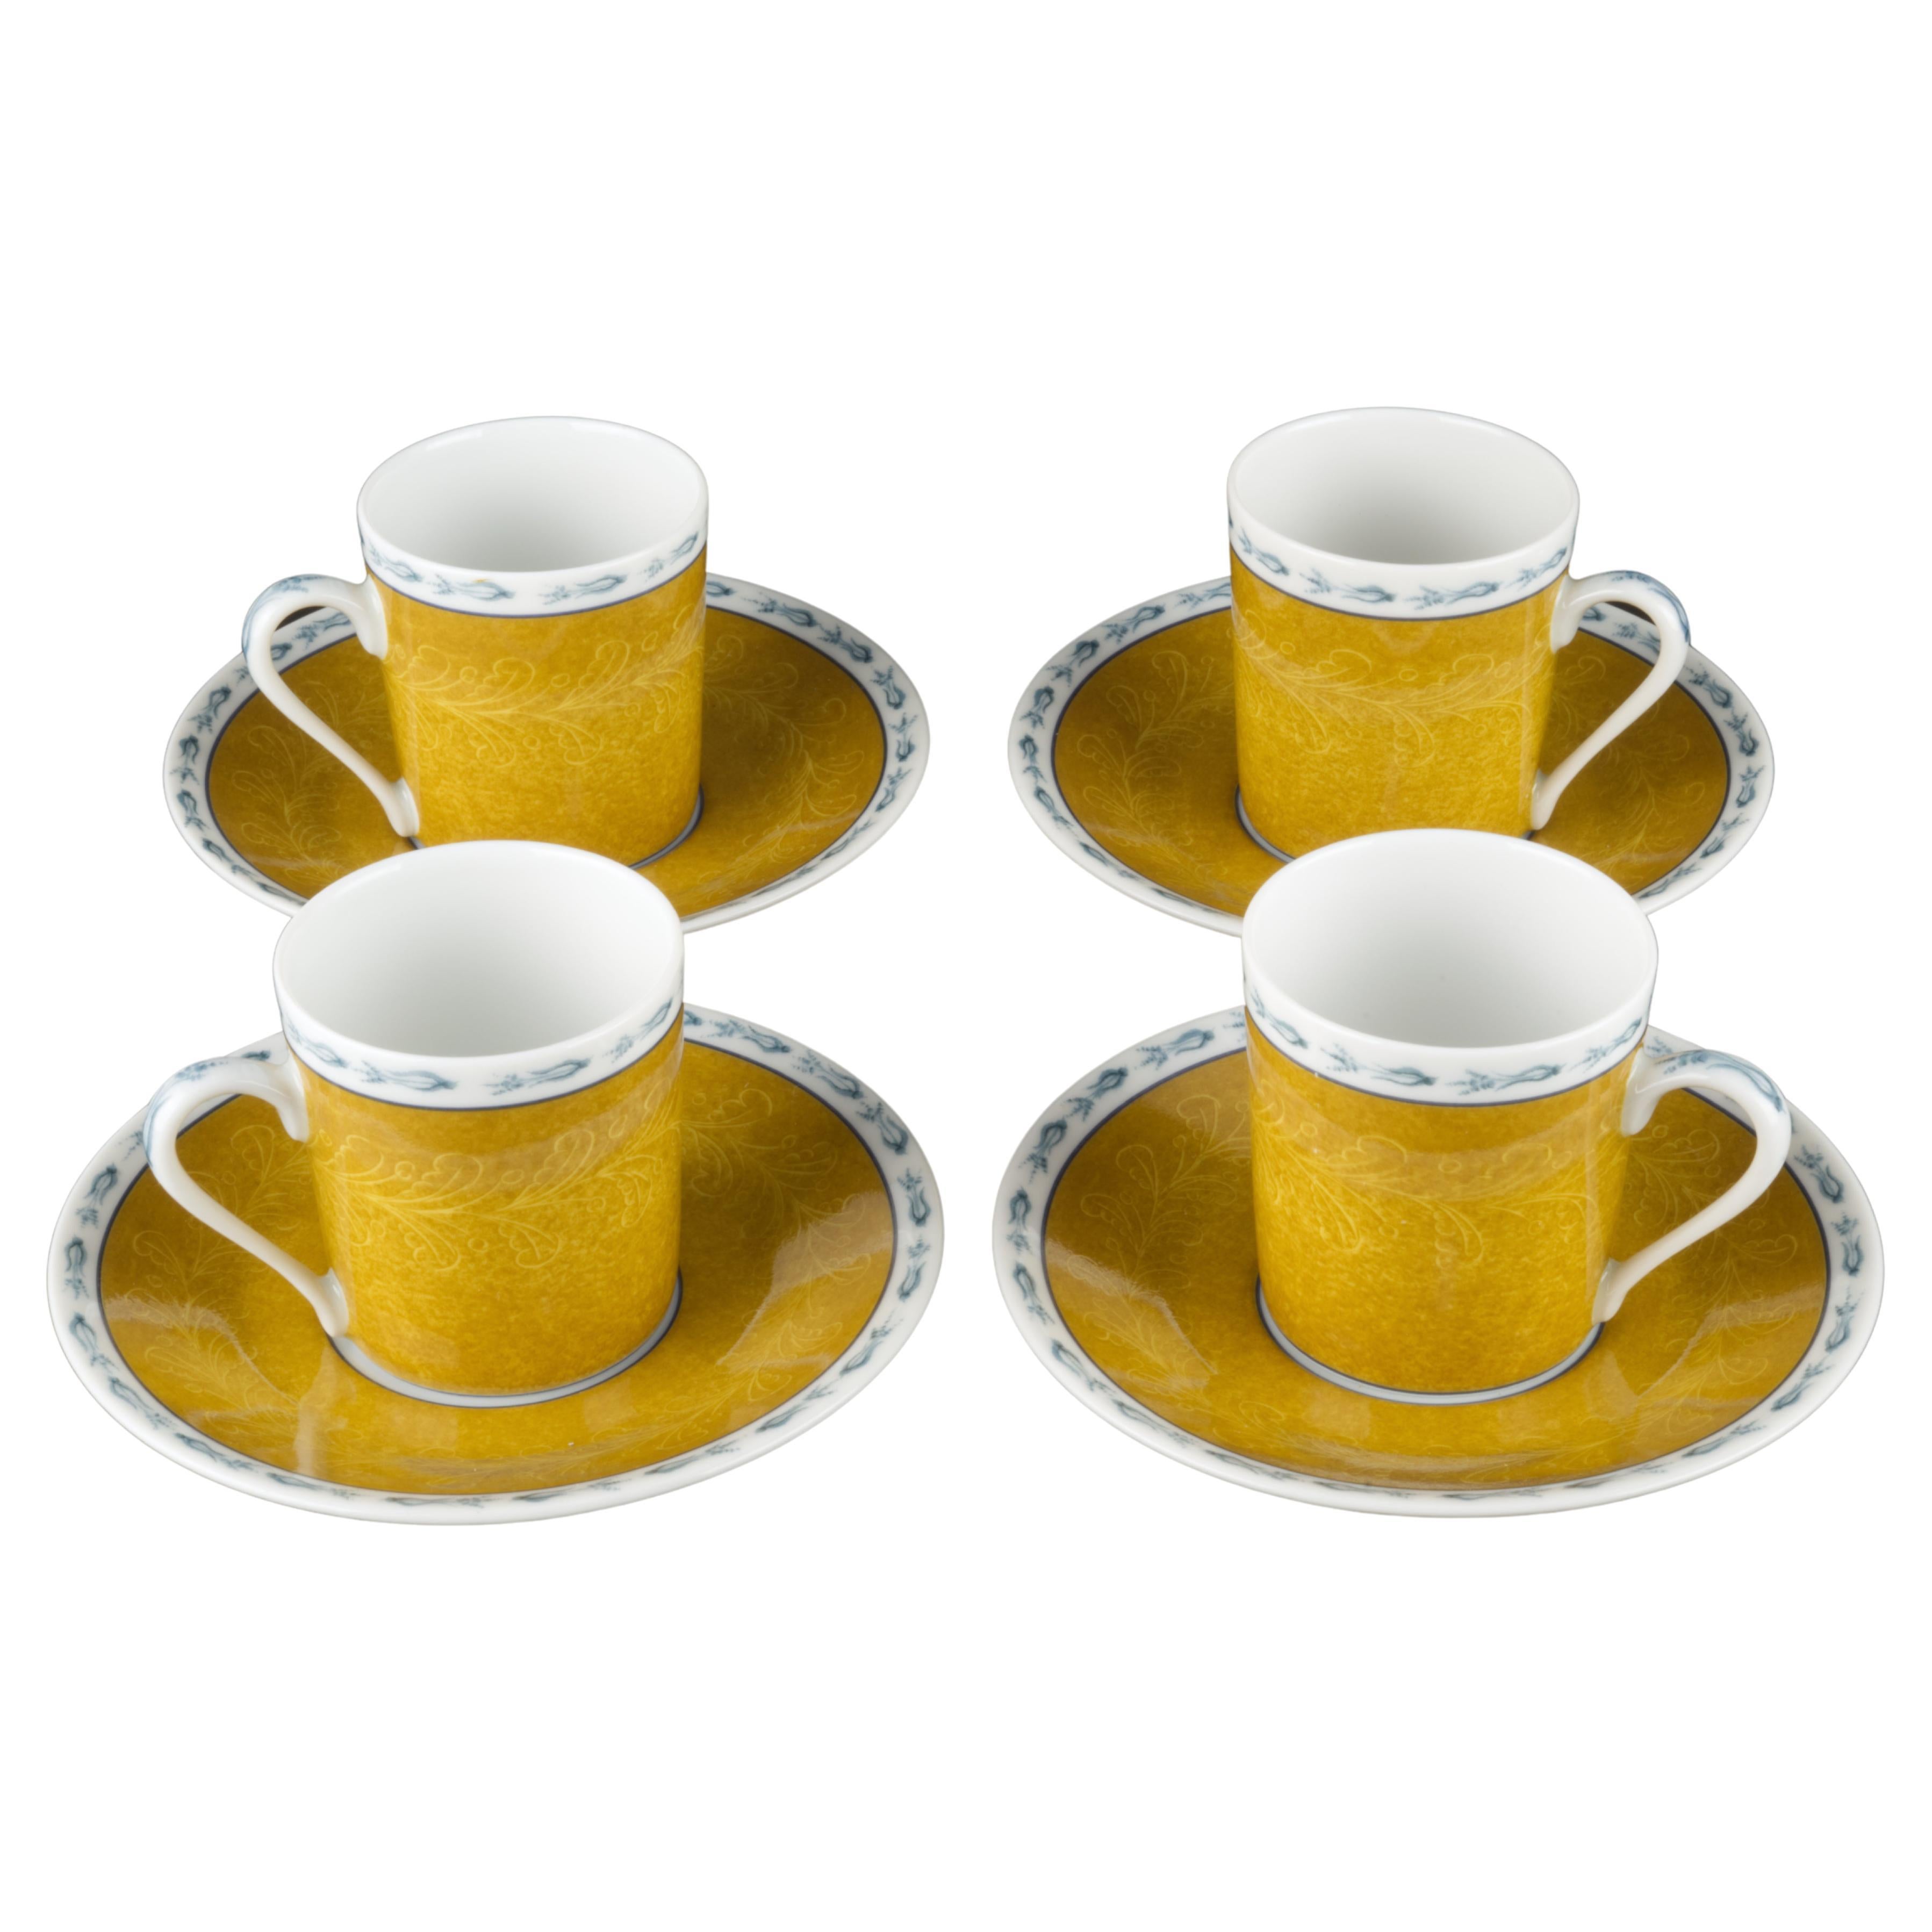 Basse Cour by Pierre Frey set of 4 Demitasse Cups and Saucers, Limoges Porcelain